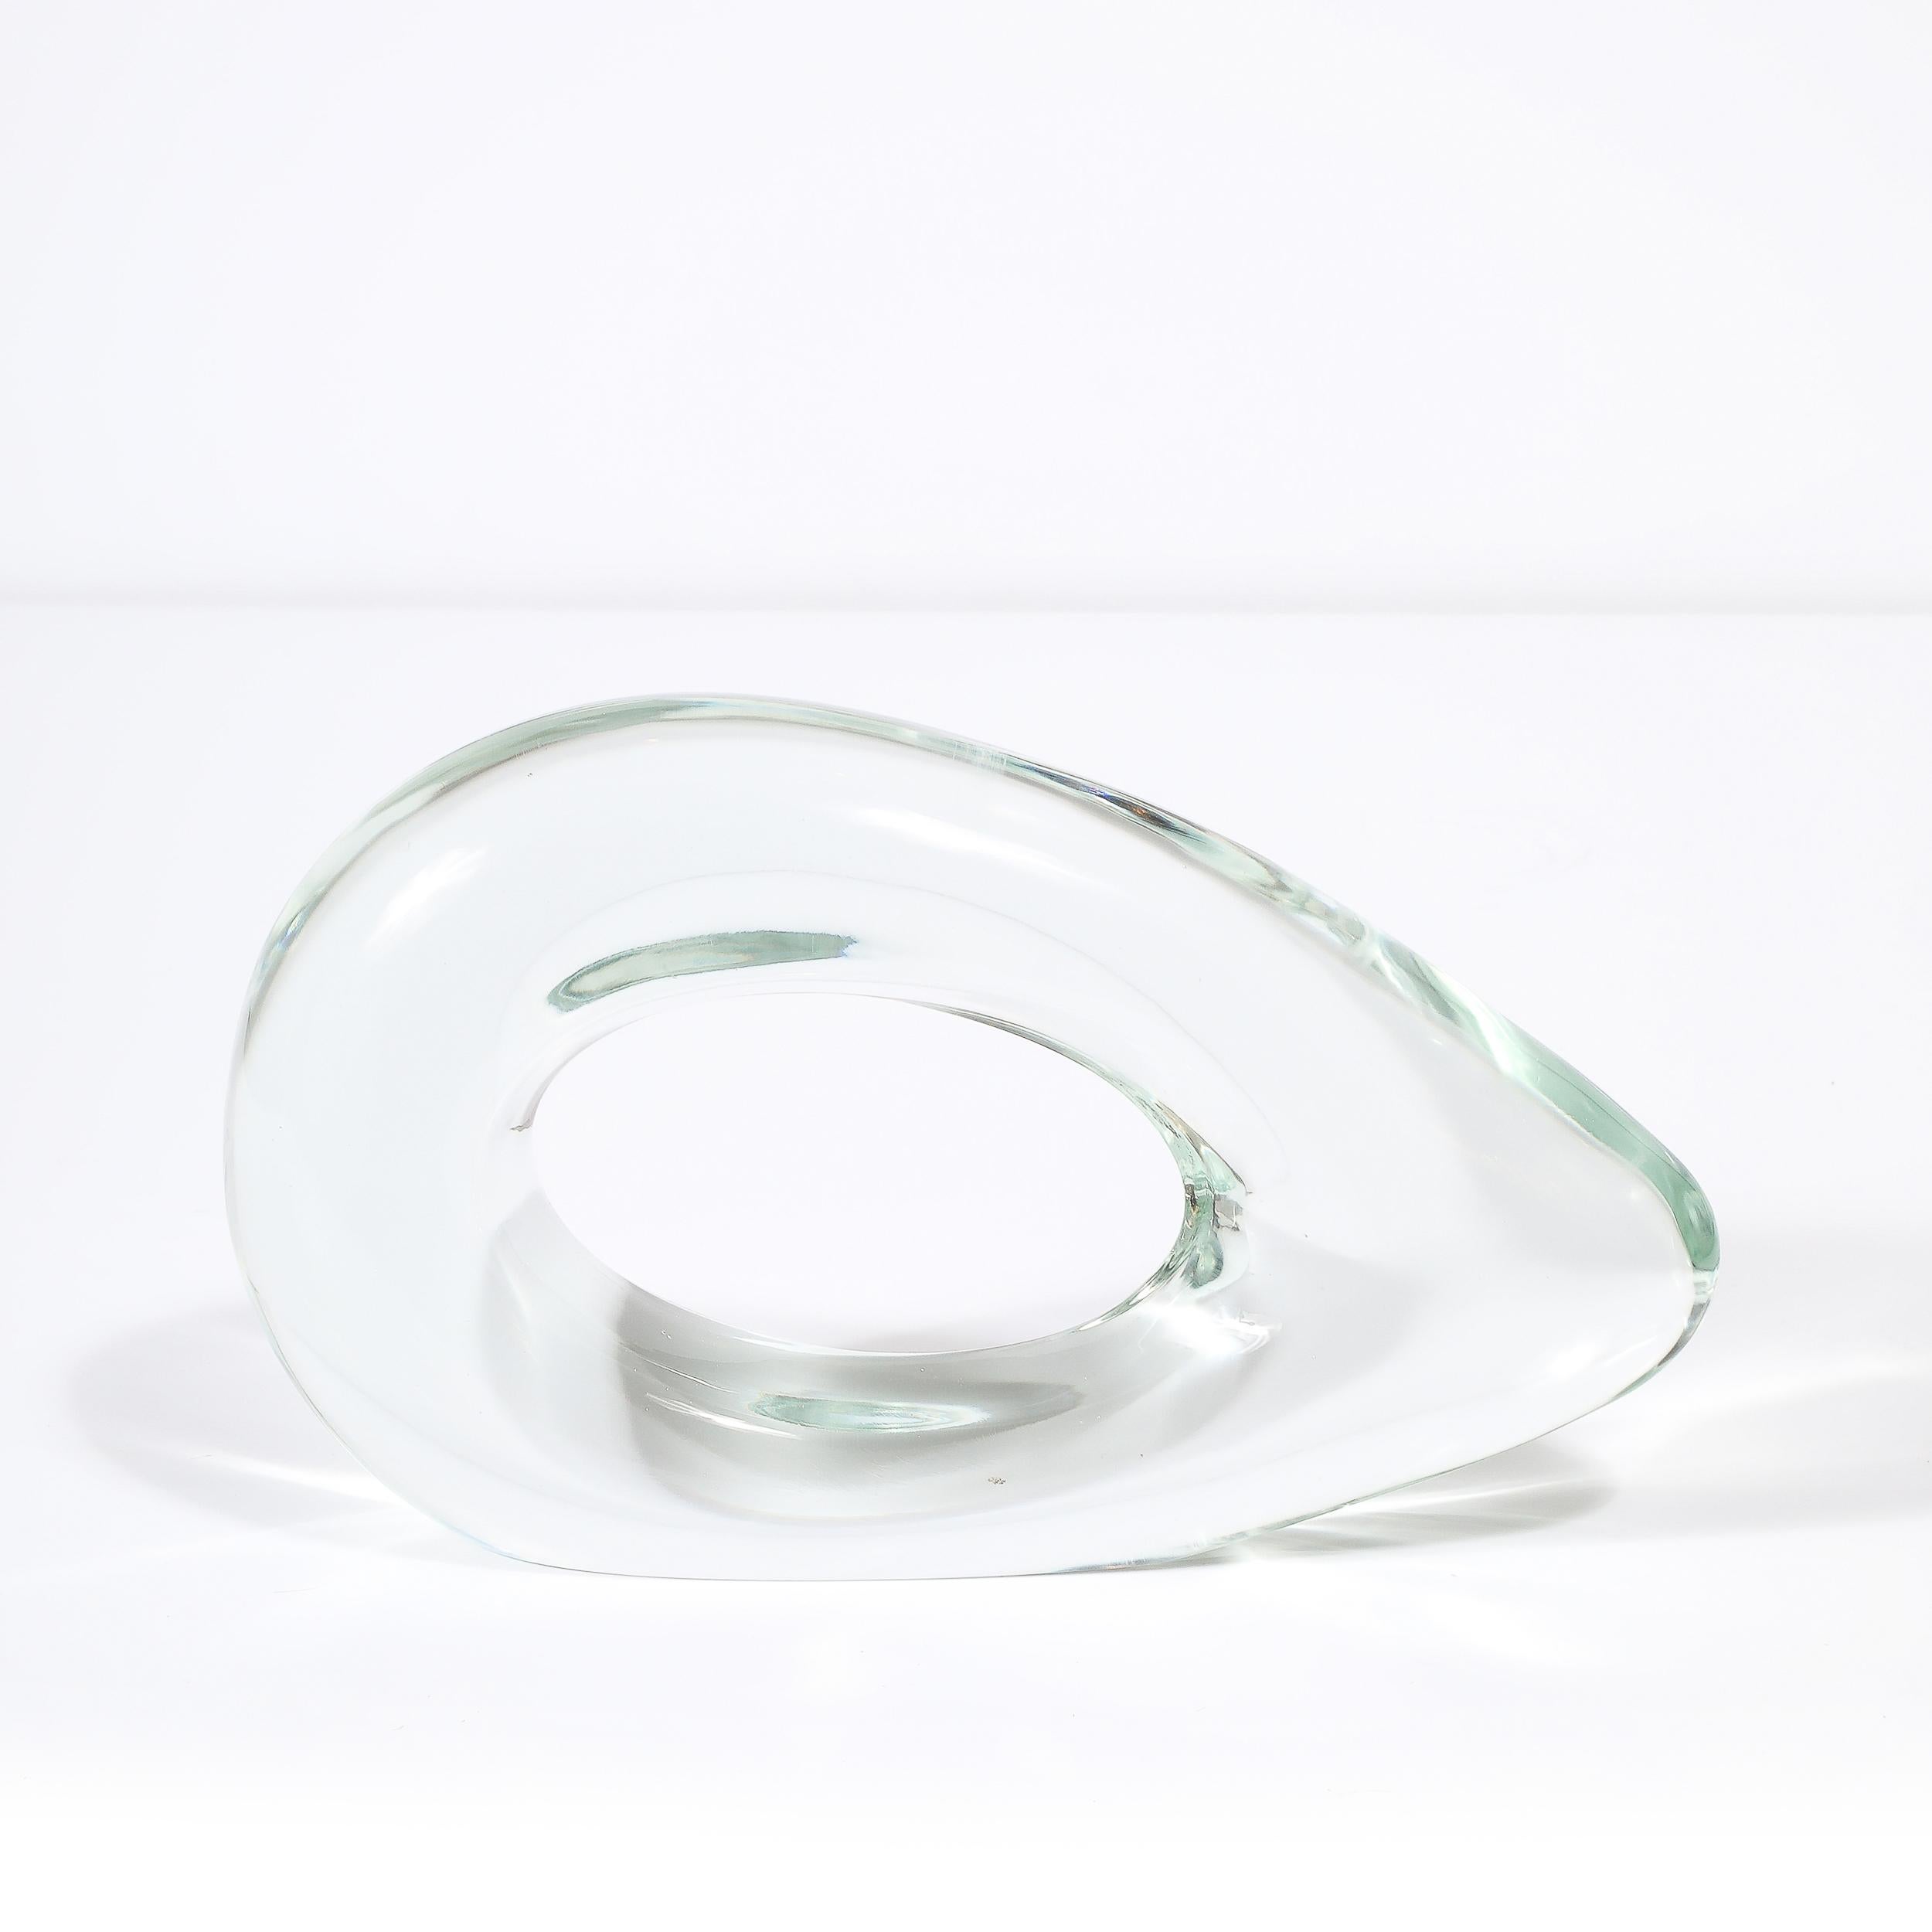 This minimal yet effortlessly stunning Mid-Century Modernist Organic Hand-Blown Transparent Murano Art Glass Sculpture is signed Salviati and originates from Italy, Circa 1960. Features an asymmetrical rounded form in stunning hand-blown murano